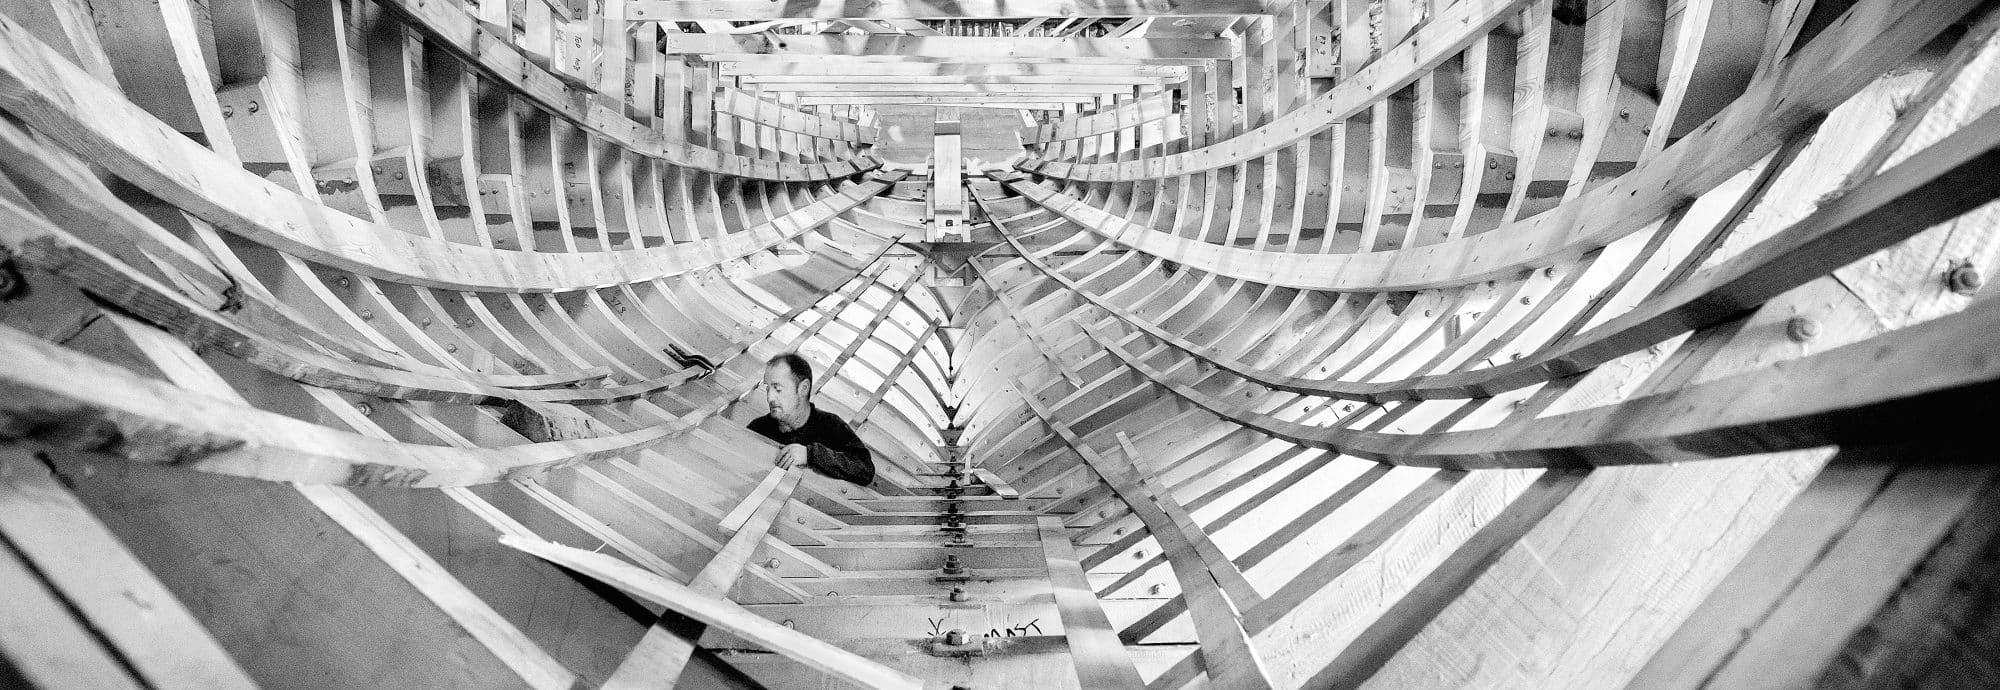 Black and white photo of a man working on a wooden boat.